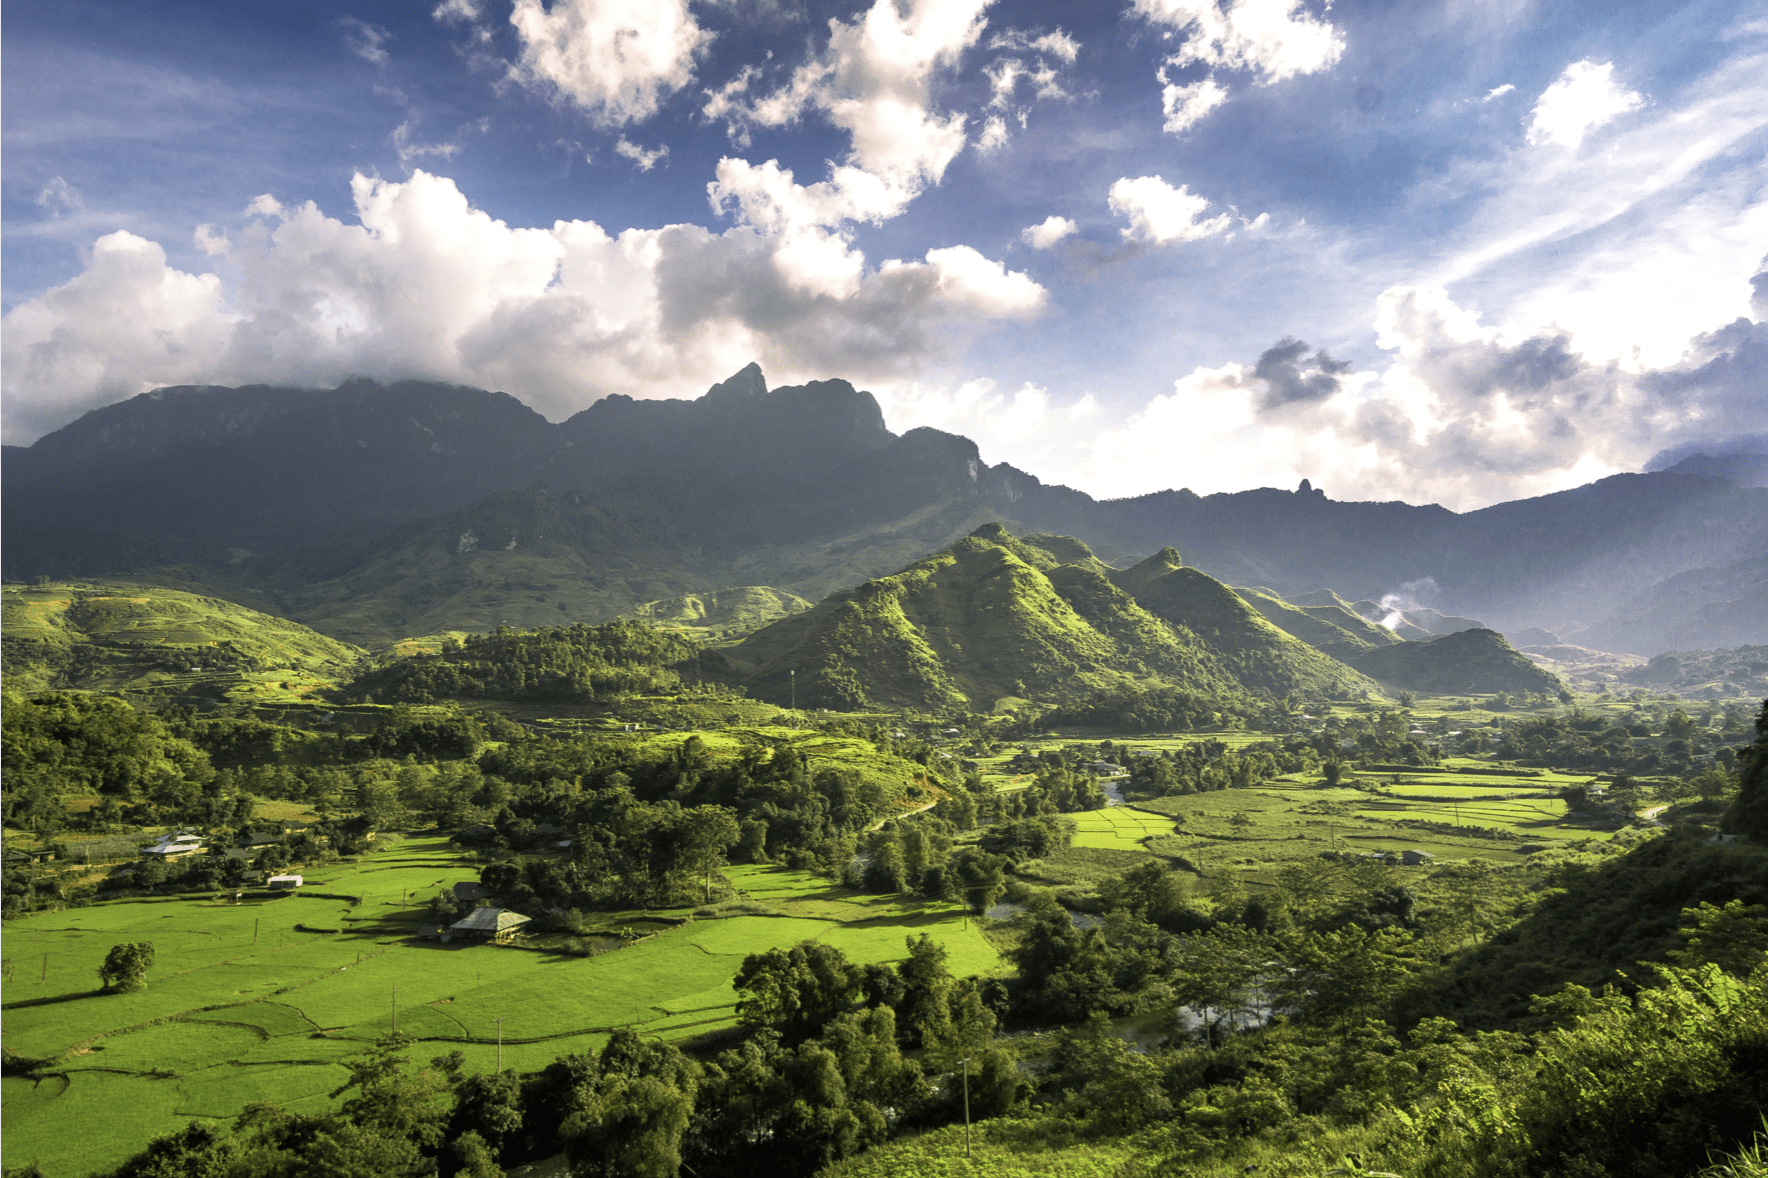 Greenery in Vietnam with many trees alongside a mountain with clouds and blue sky 